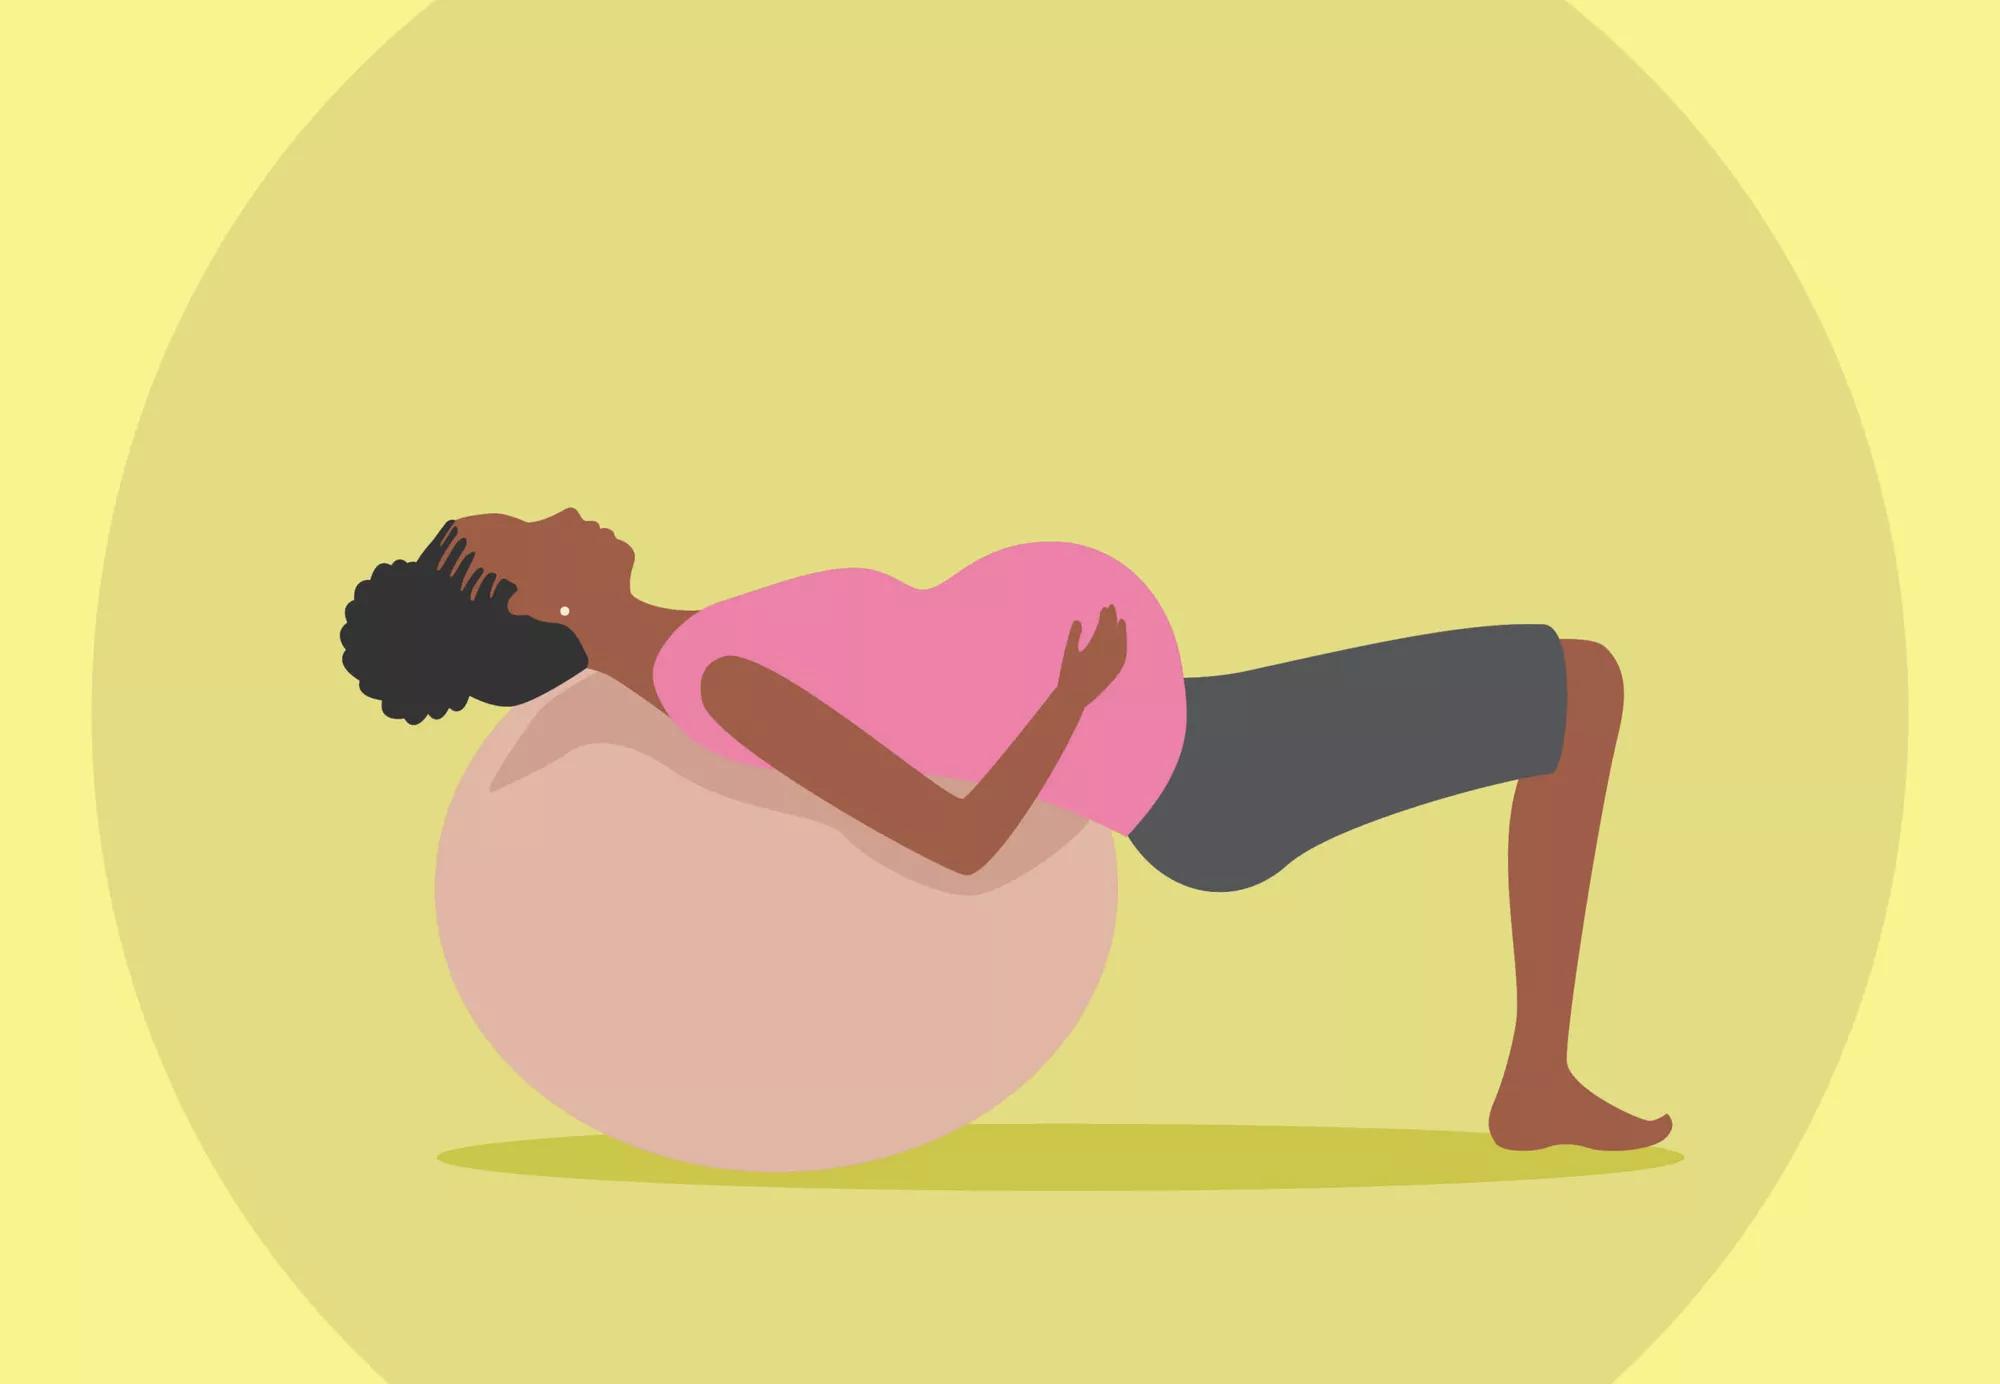 How To Use A Yoga Ball